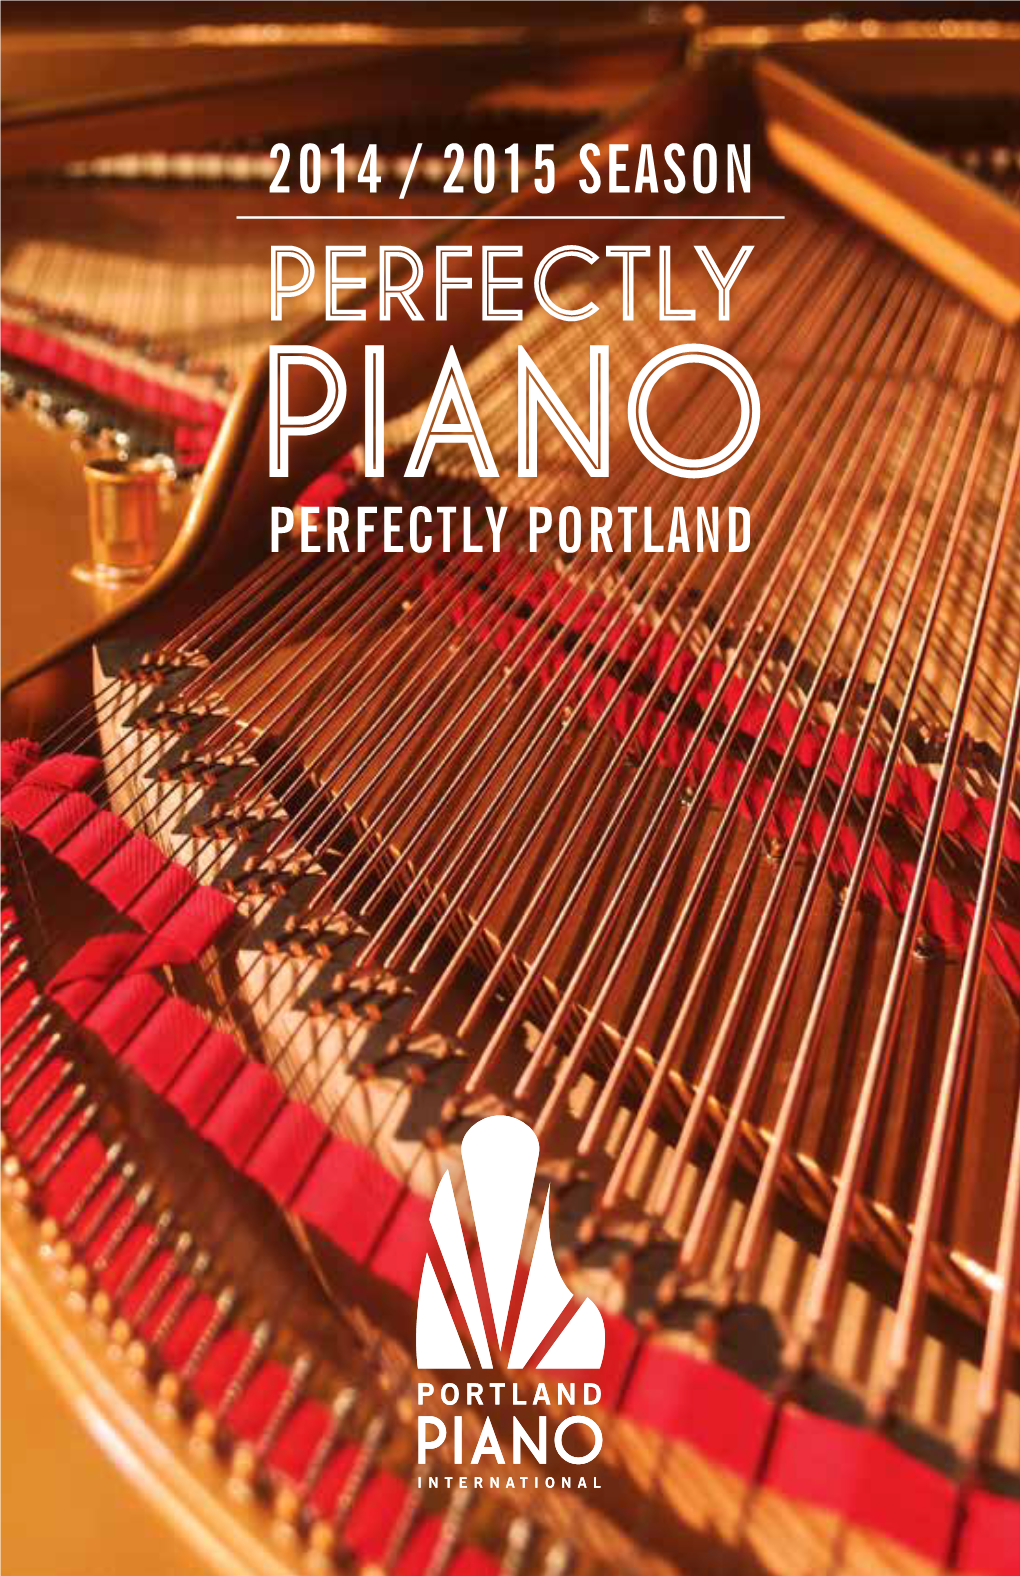 PERFECTLY PIANO PERFECTLY PORTLAND a Fine Piano Is More Than an Instrument